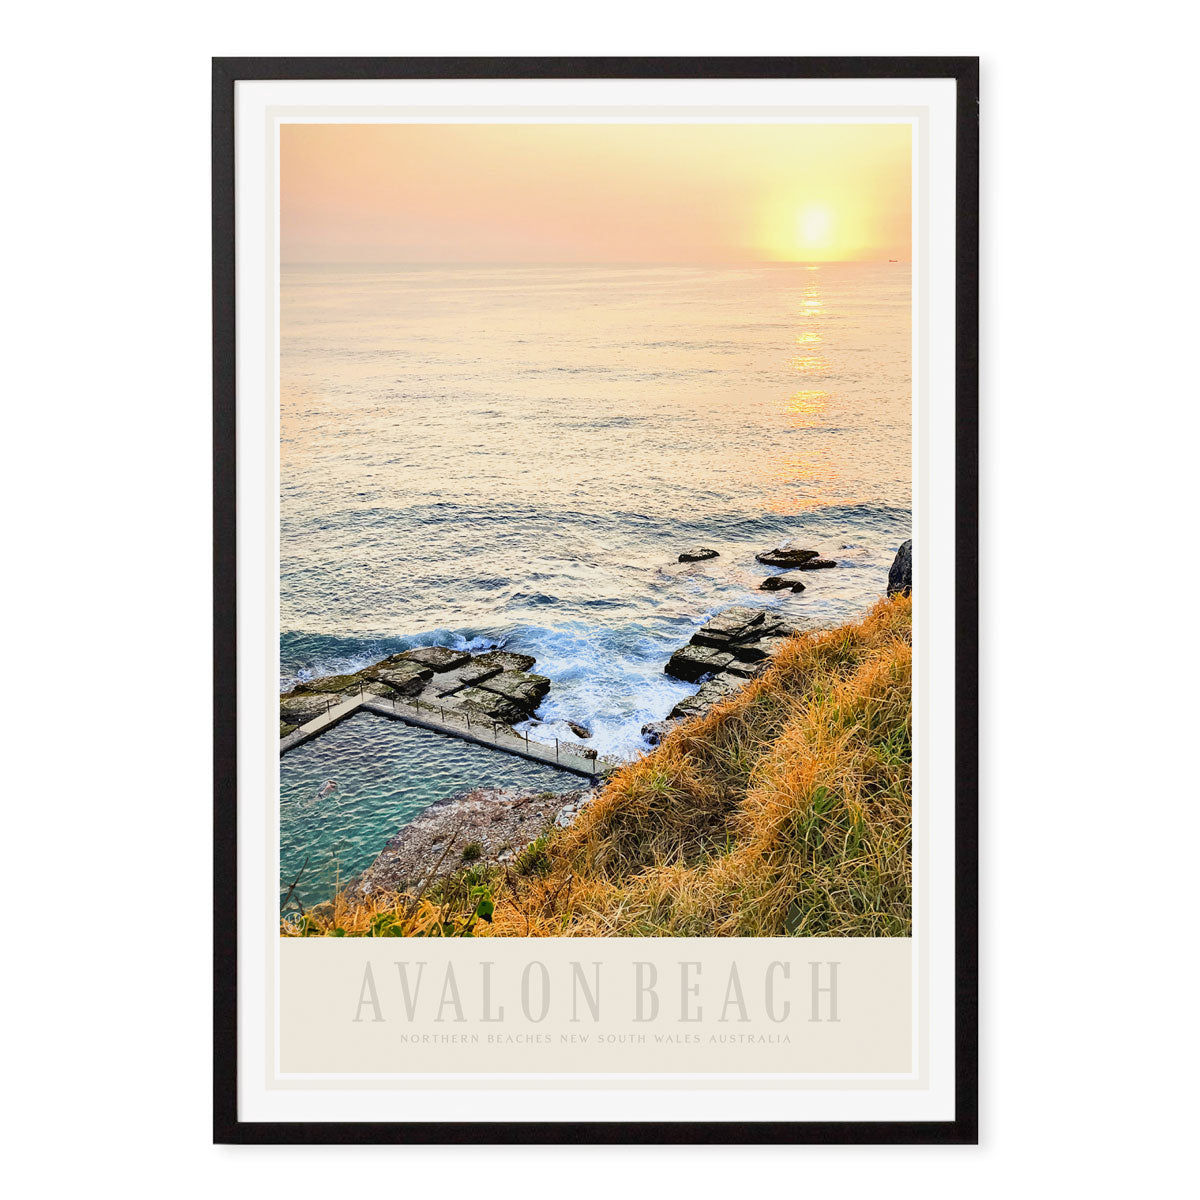 Avalon Beach vintage retro travel poster print in black frame by Places We Luv